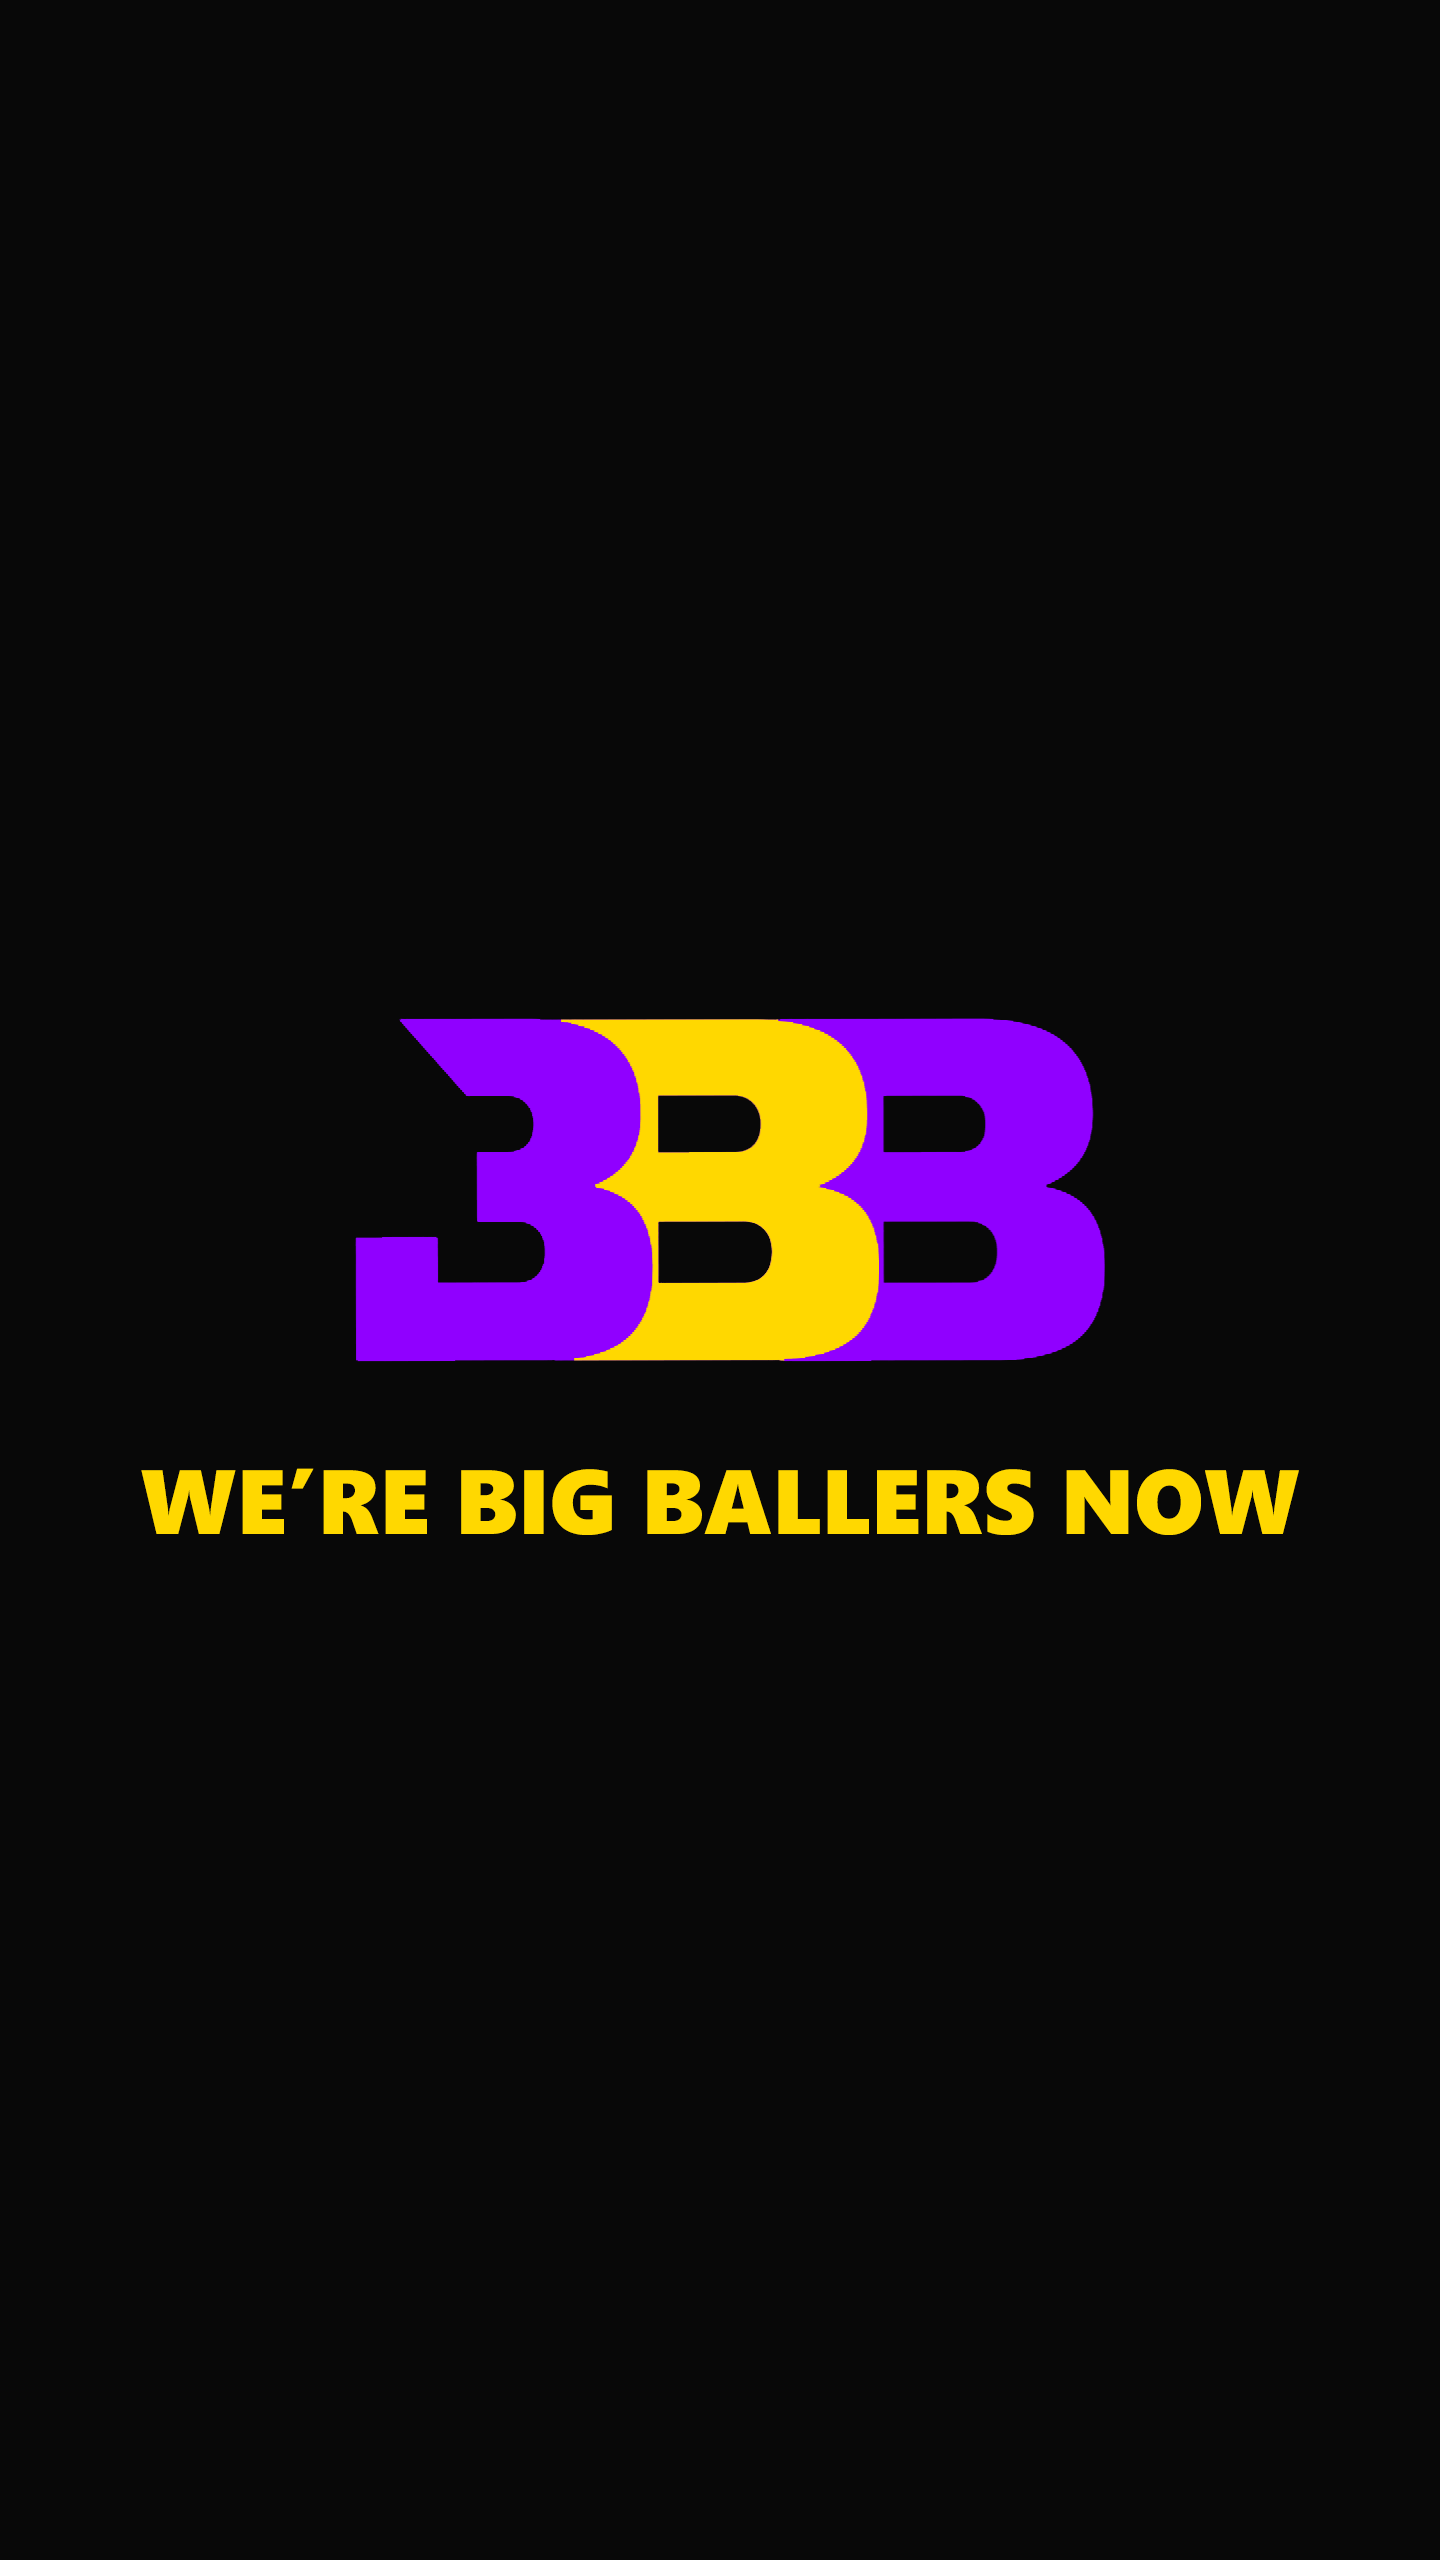 Cousin told me y'all needed a BBB phone wallpaper